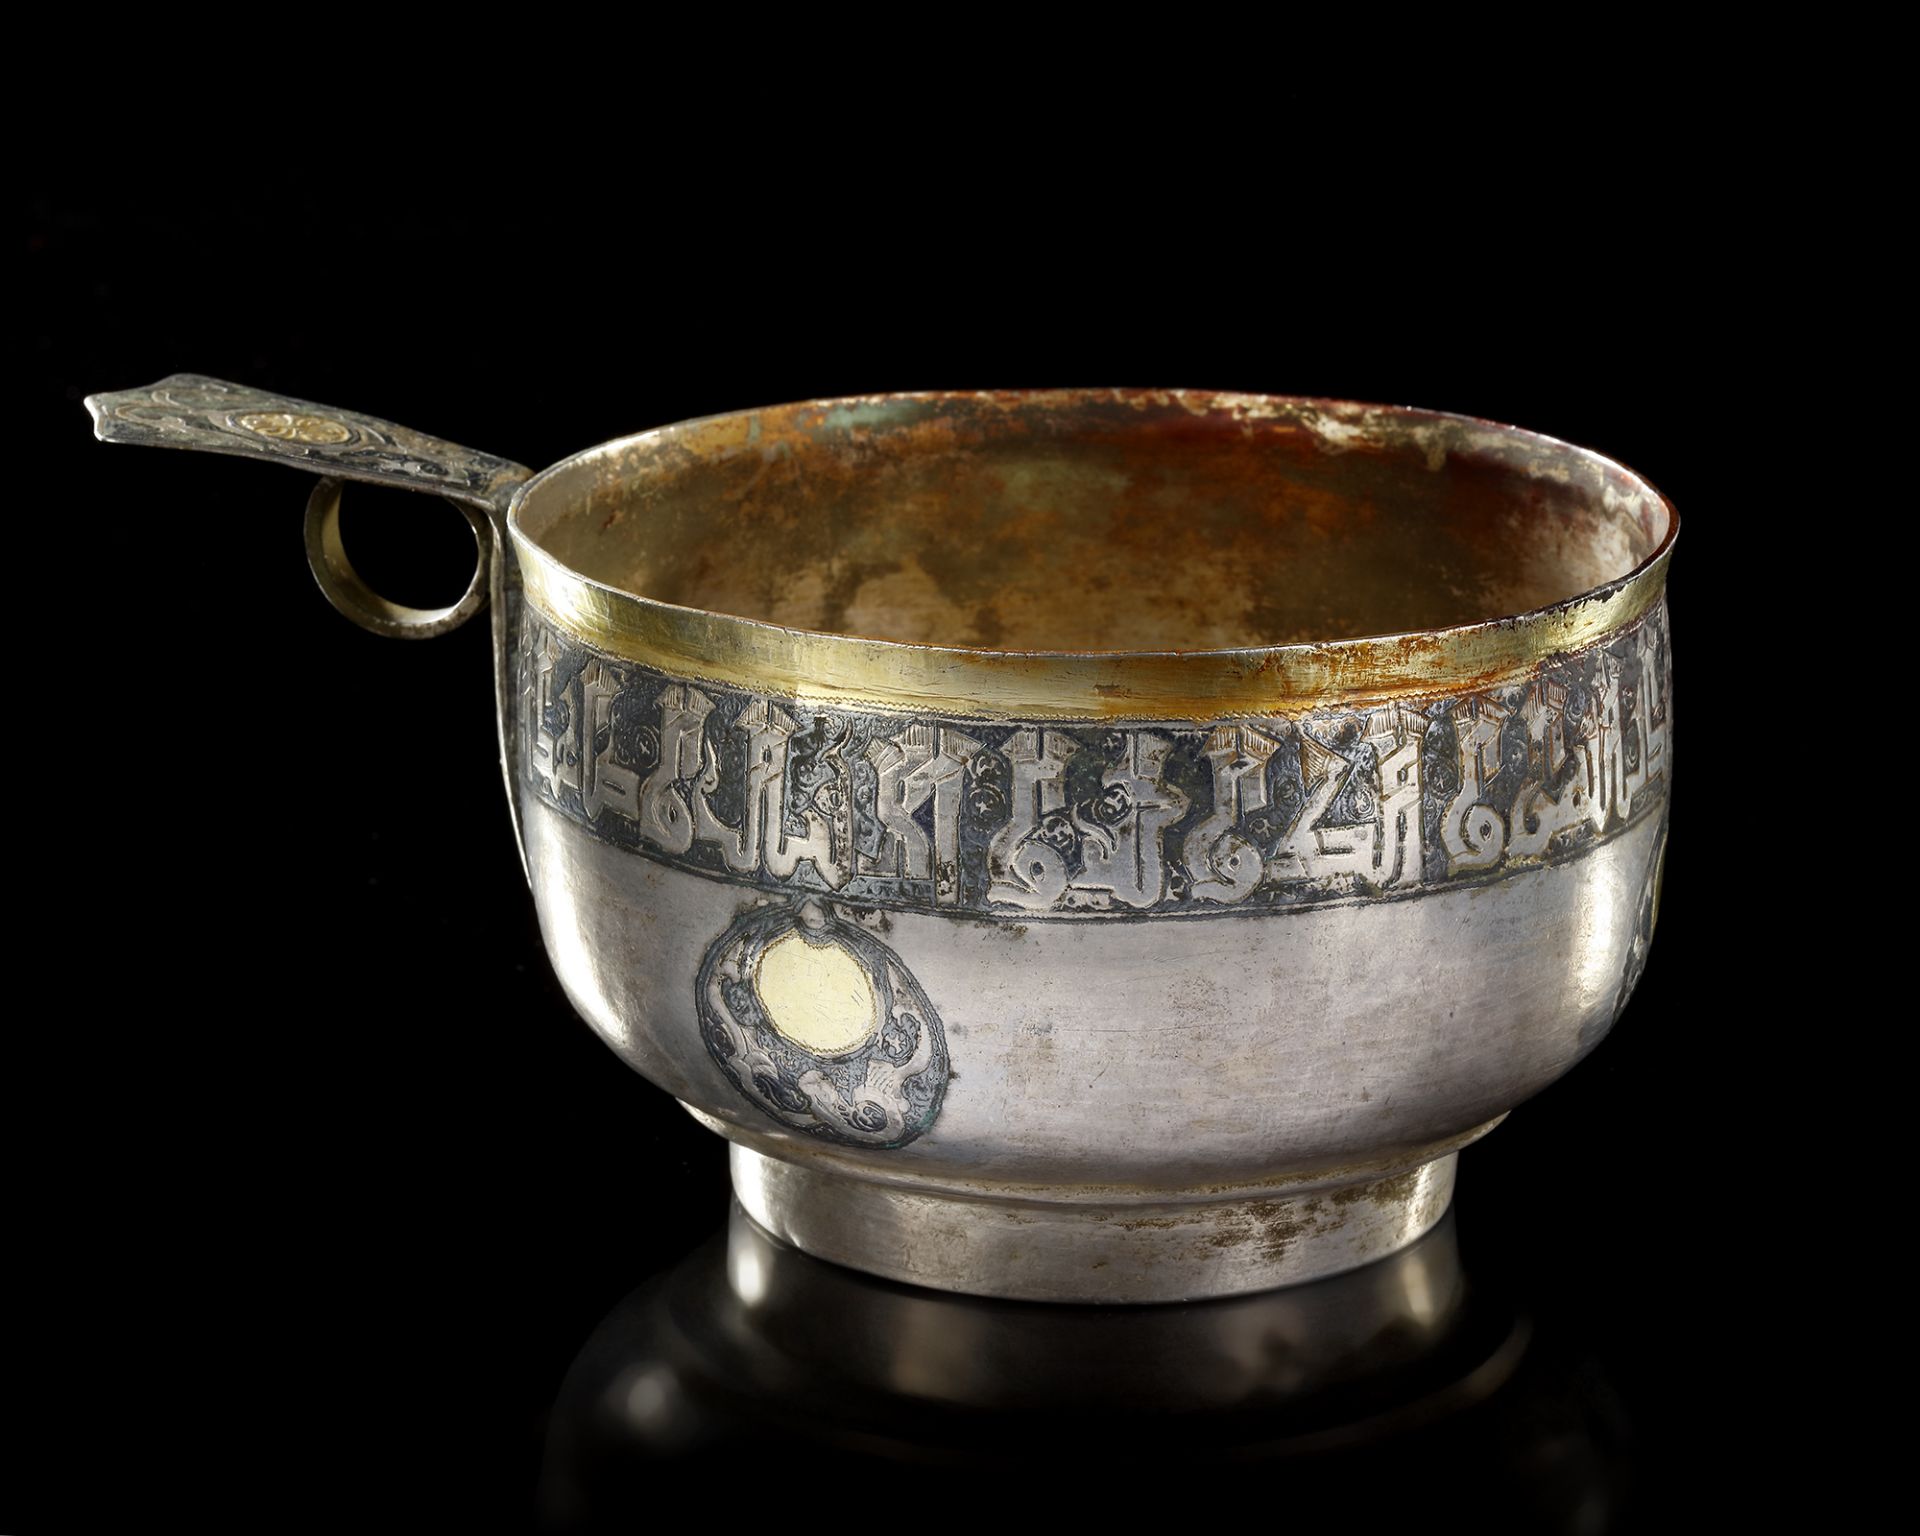 A RARE SILVER AND NIELLOED CUP WITH KUFIC INSCRIPTION, PERSIA OR CENTRAL ASIA, 11TH-12TH CENTURY - Image 14 of 34